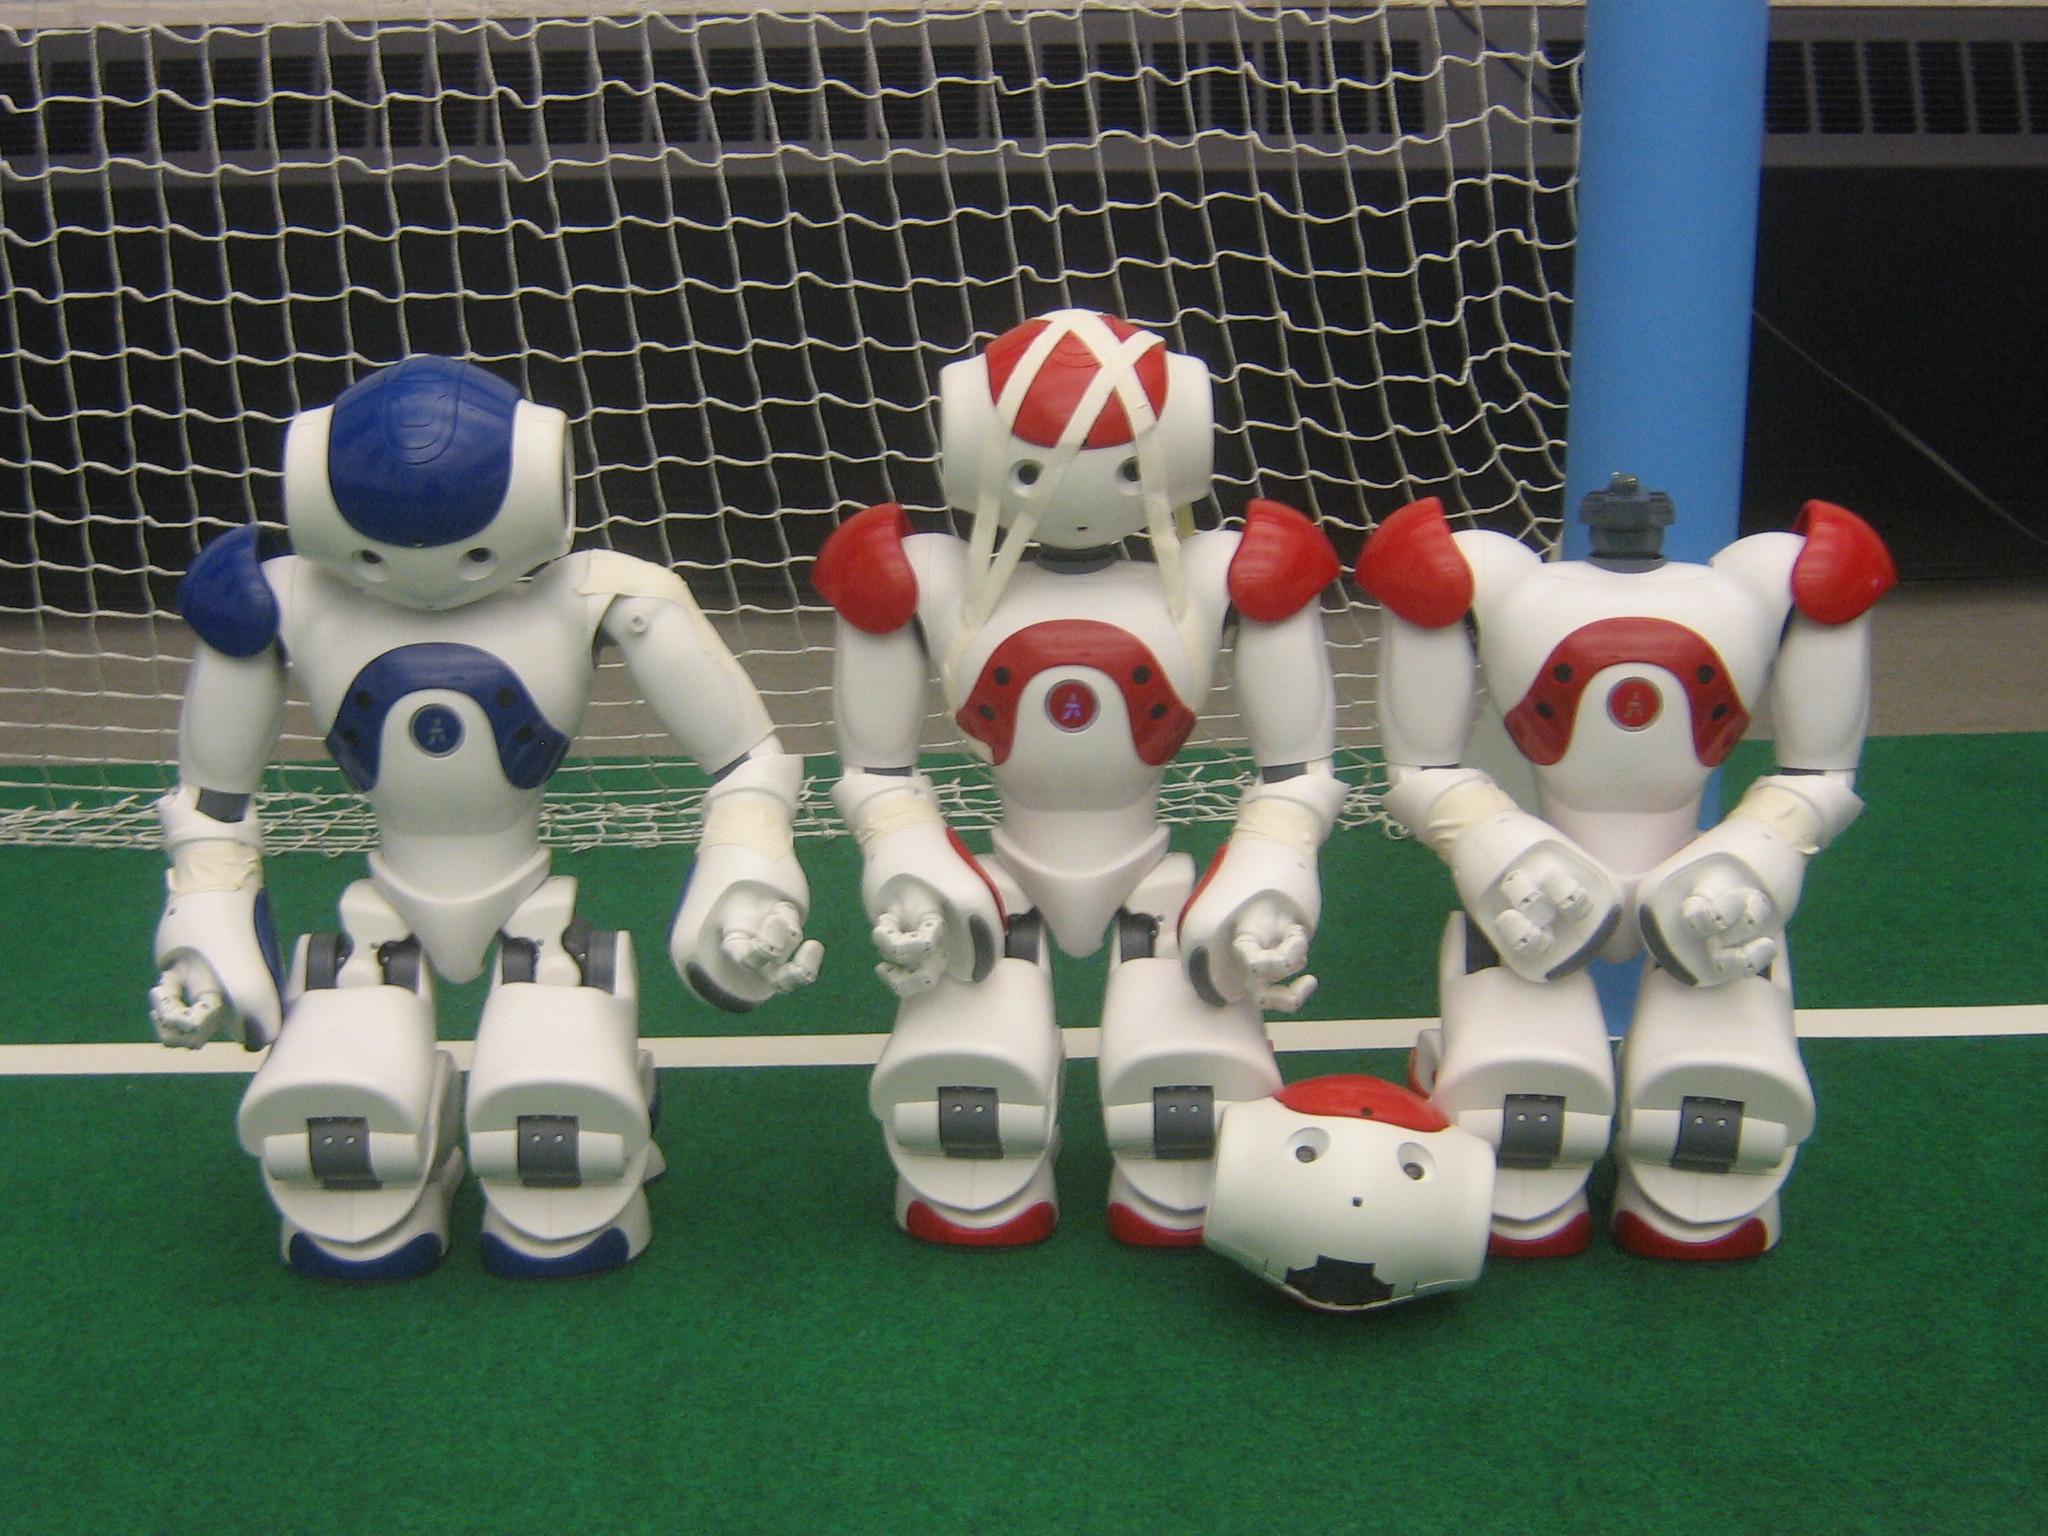 Training for RoboCup is hard work!